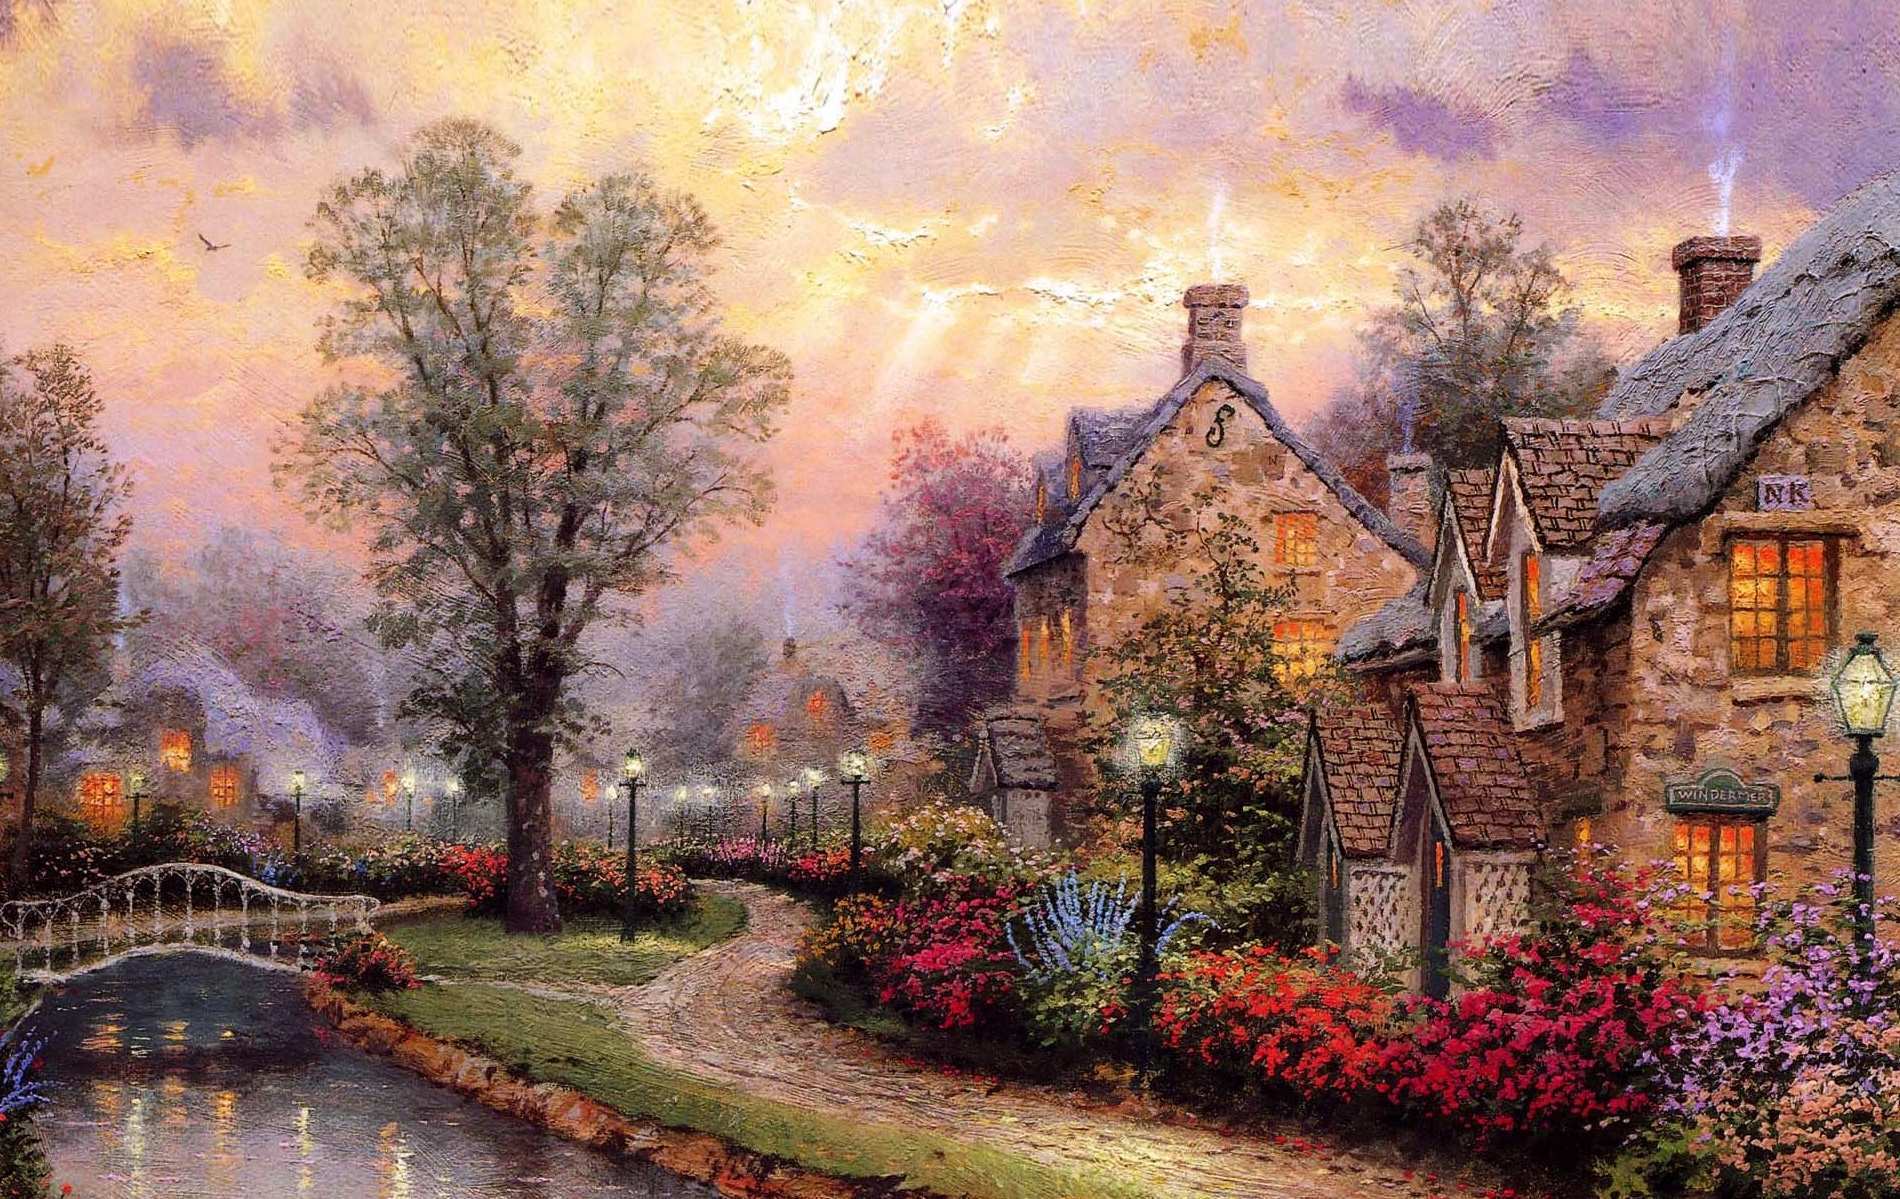 Oil Painting Wallpaper Best Of Thomas Kinkade Wallpaper HD Awesome